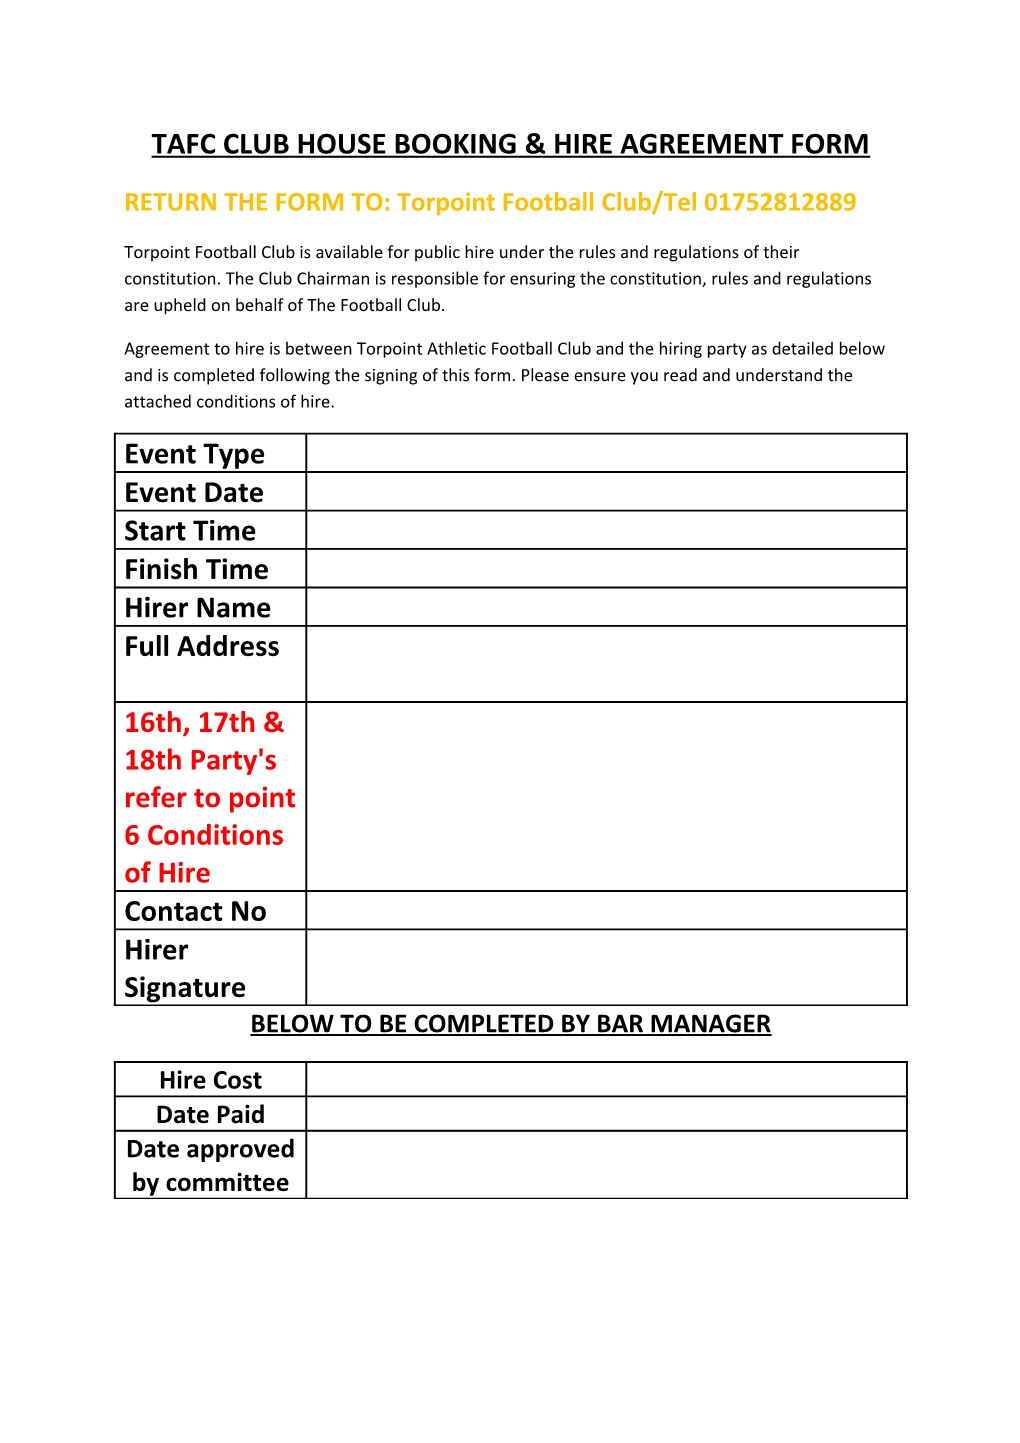 Tafc Club House Booking & Hire Agreement Form